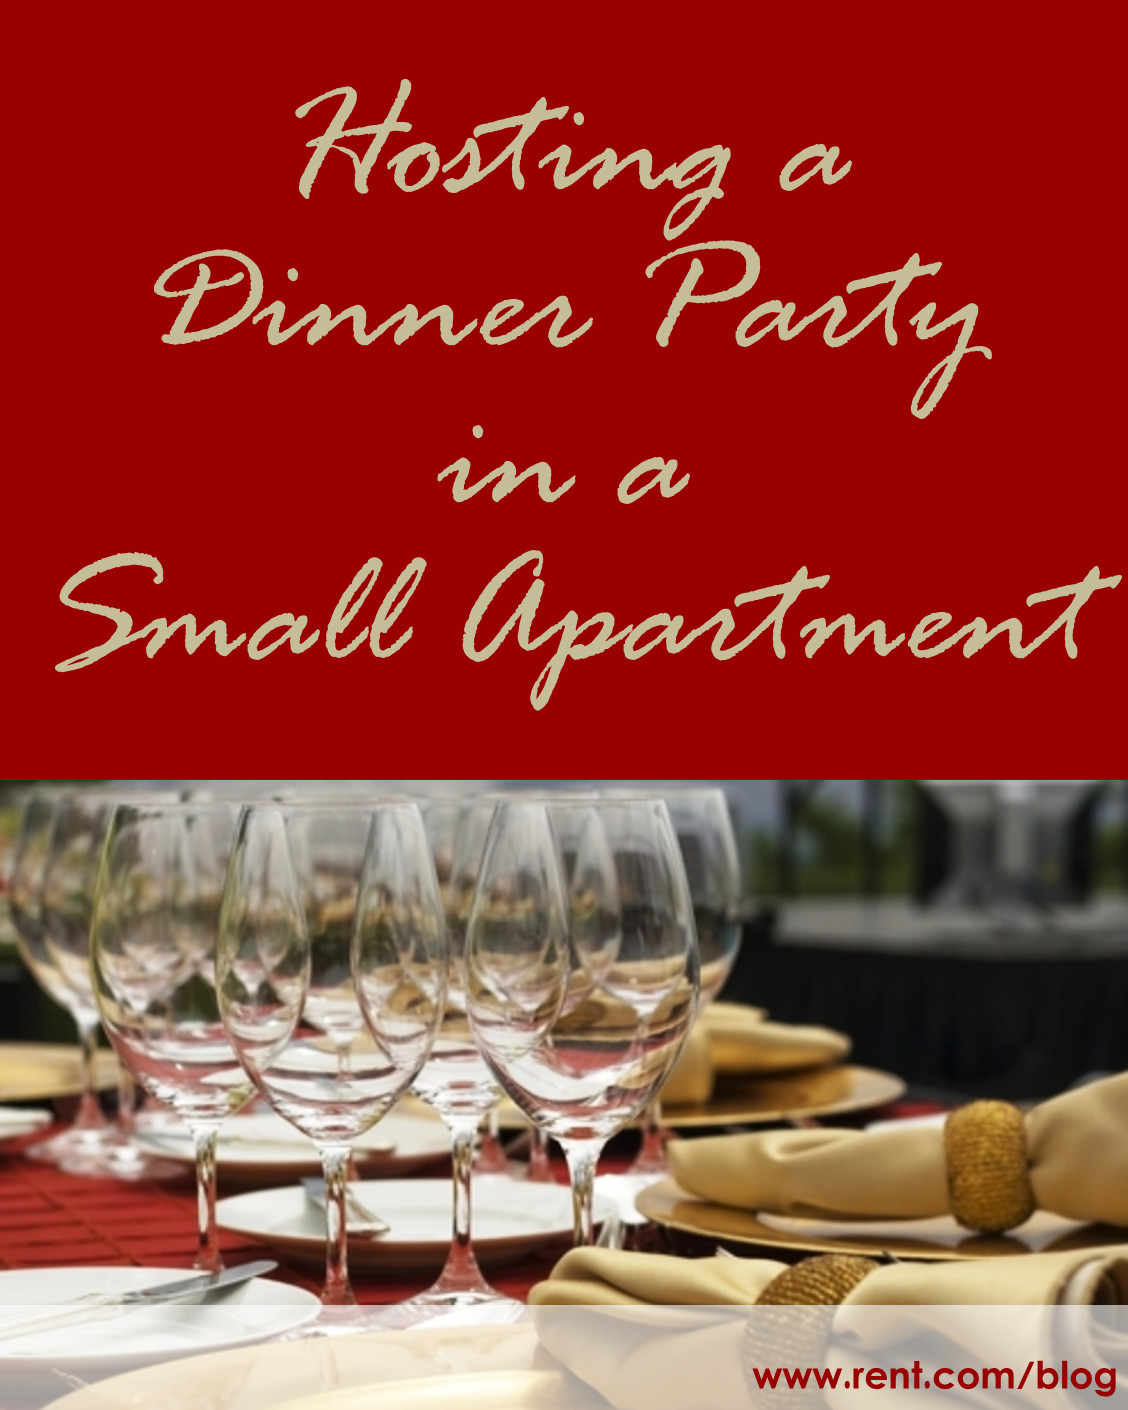 Small Christmas Party Ideas
 Hosting a Dinner Party in a Small Apartment